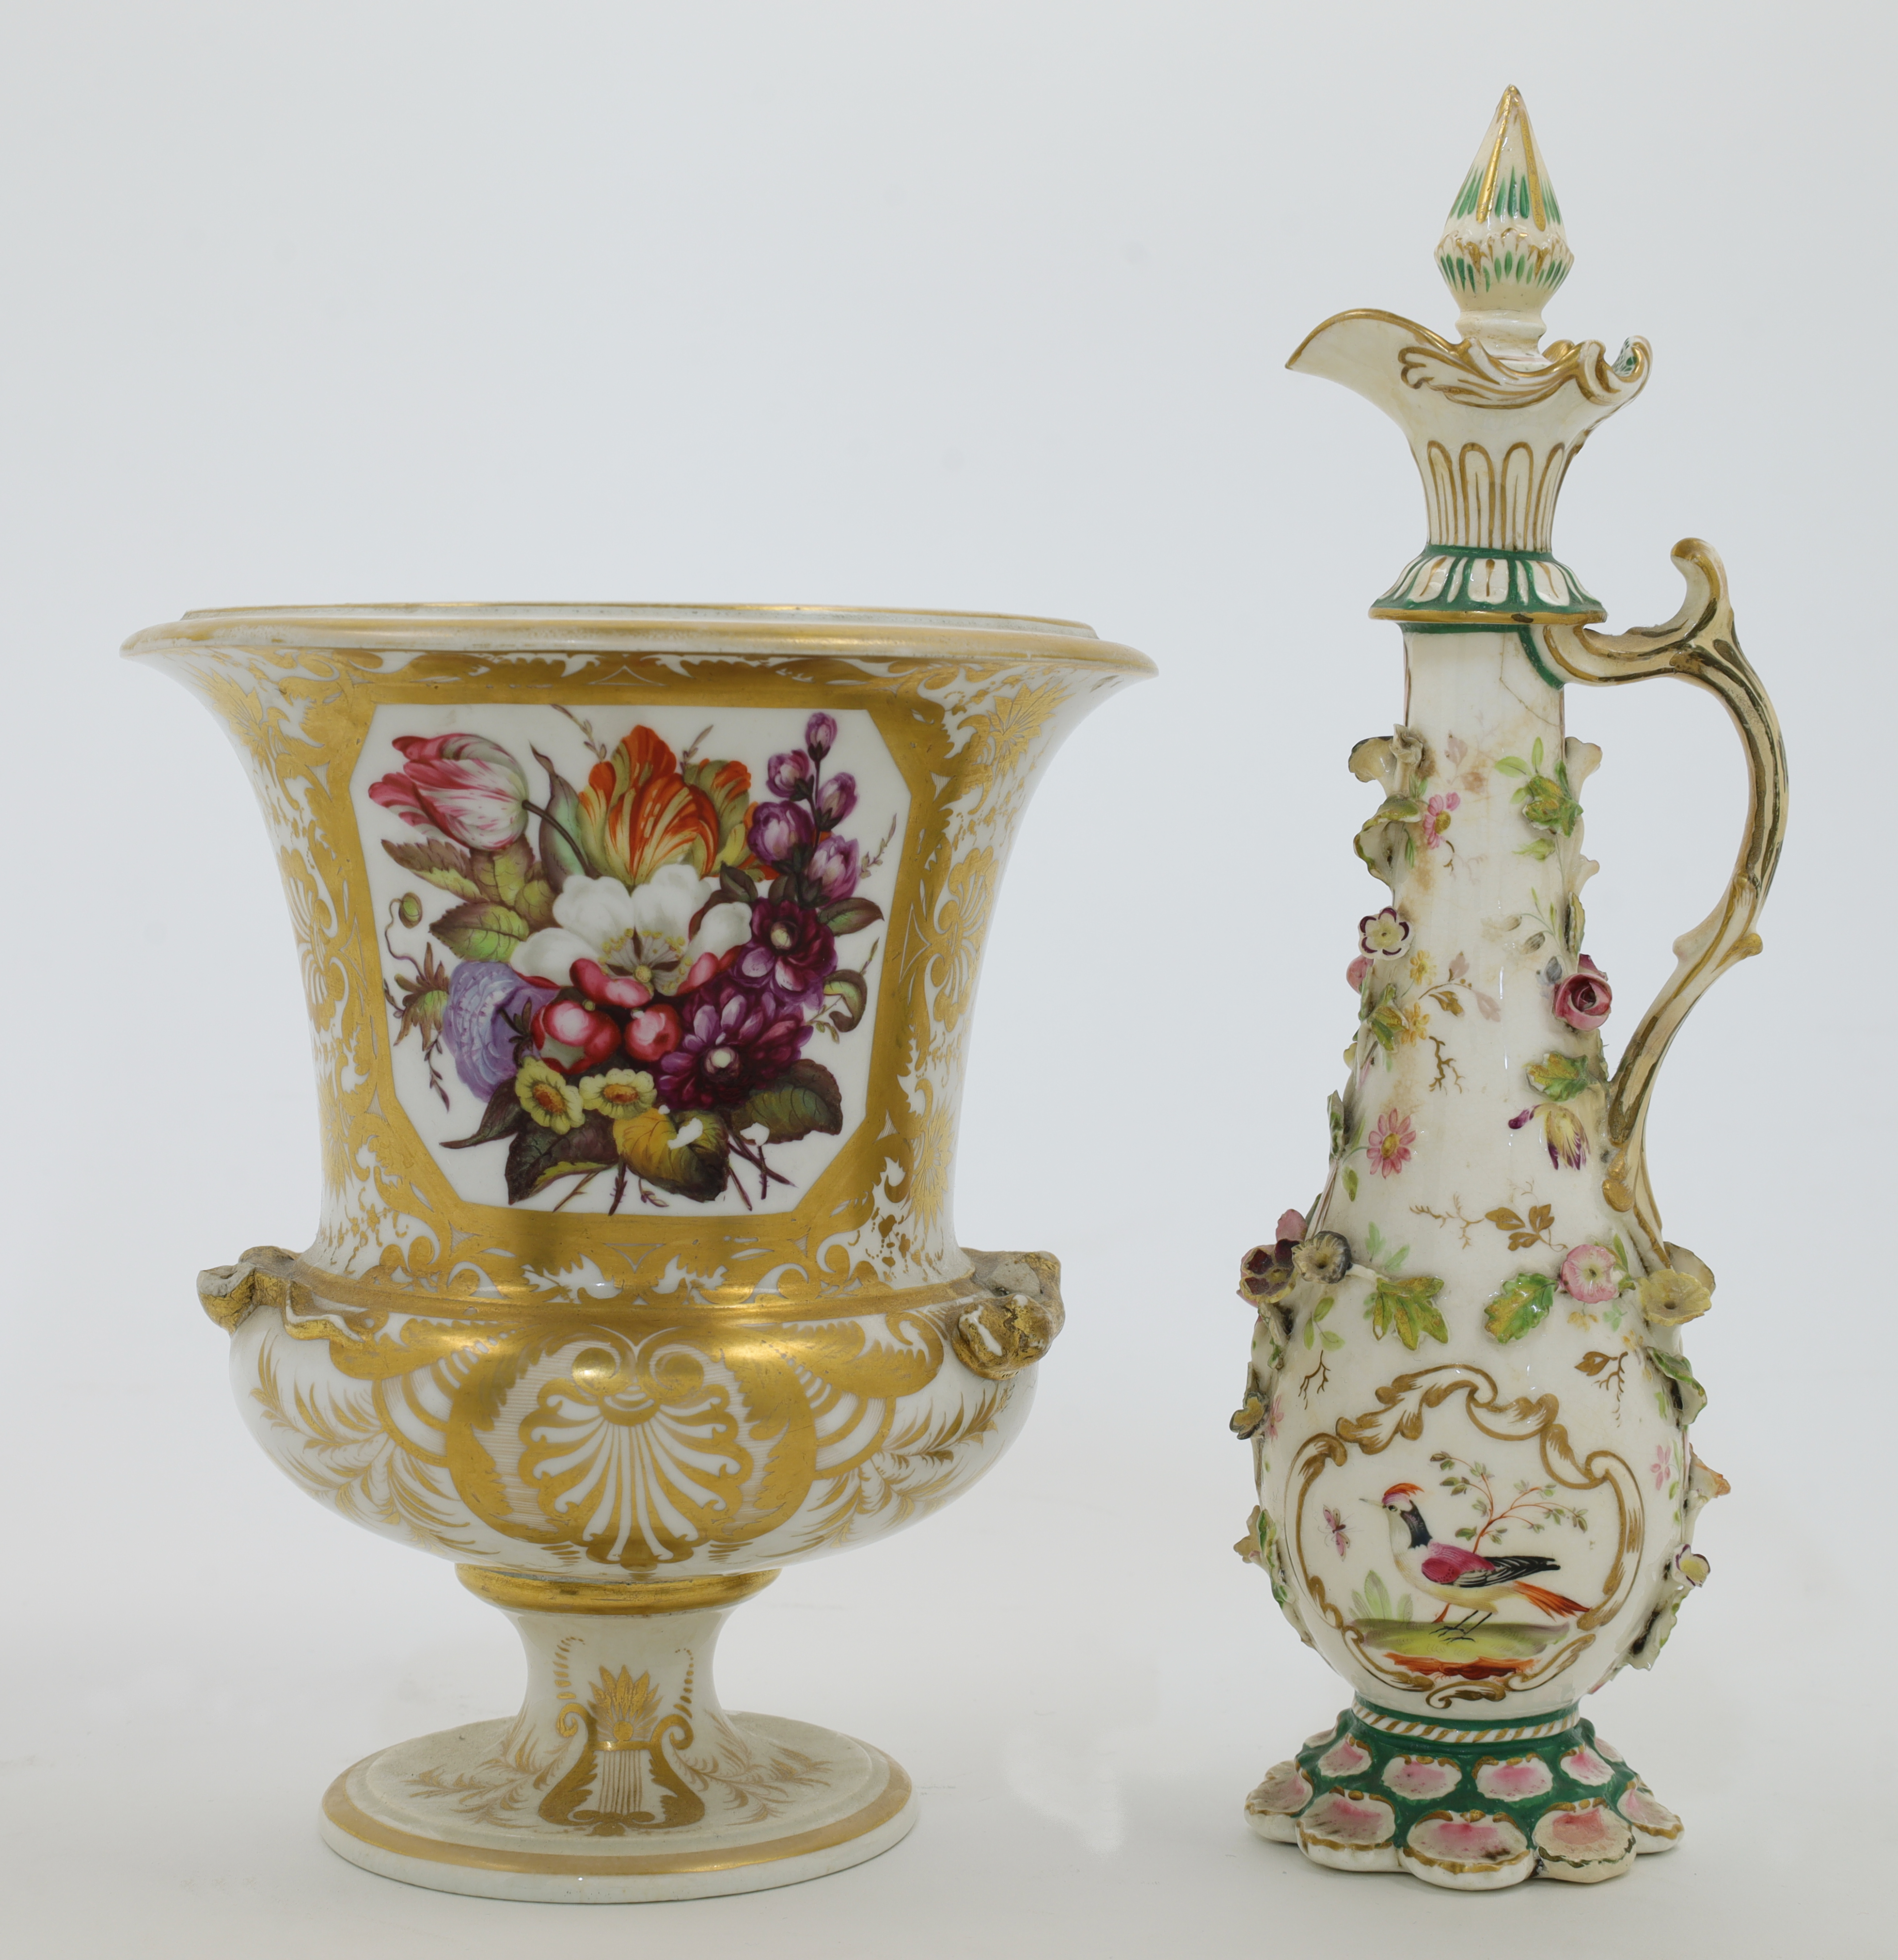 A Derby porcelain campana shape vase and an English porcelain scent bottle with stopper, early 19...